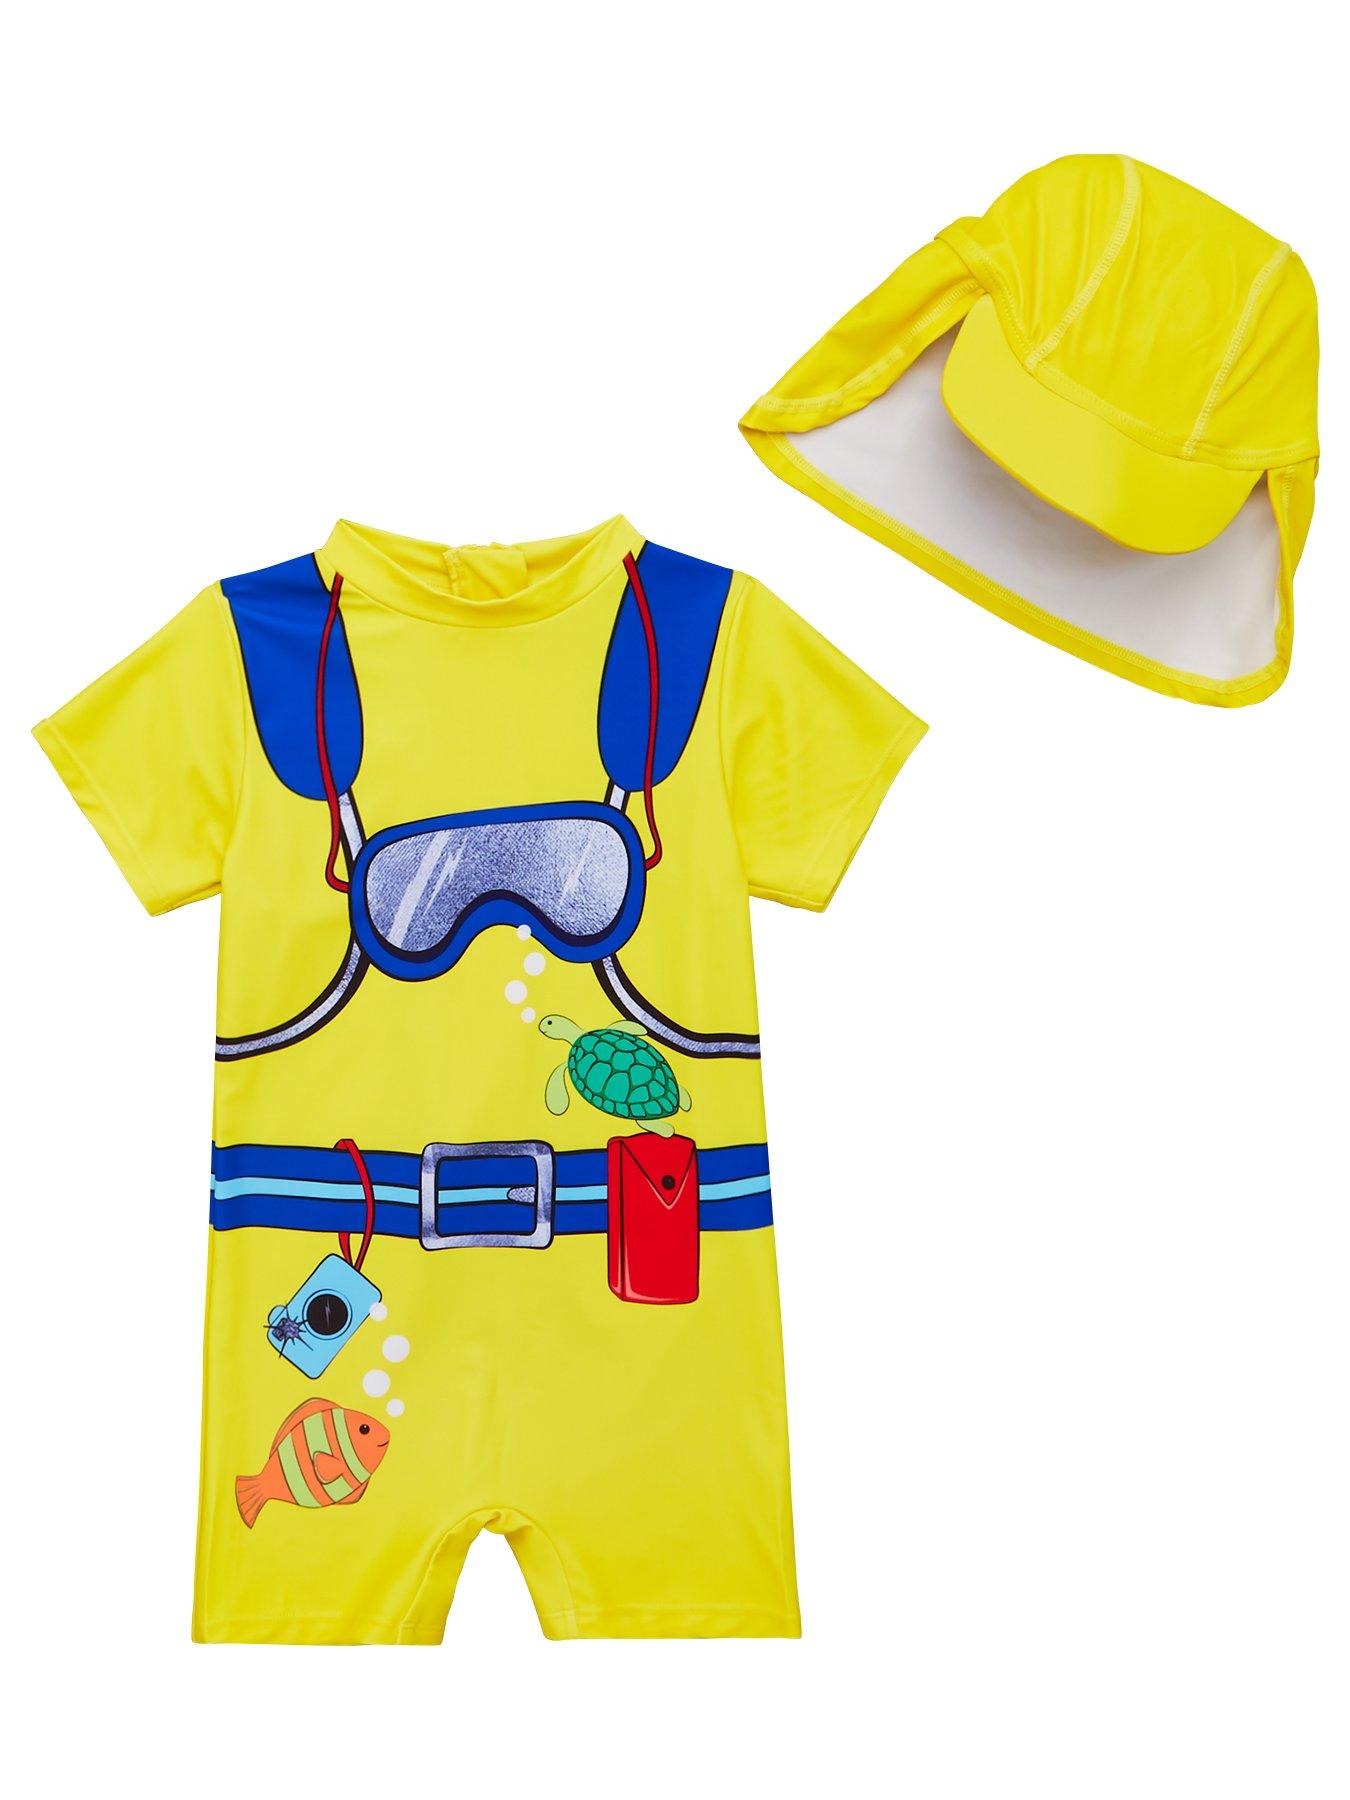 sunsafe suit and hat